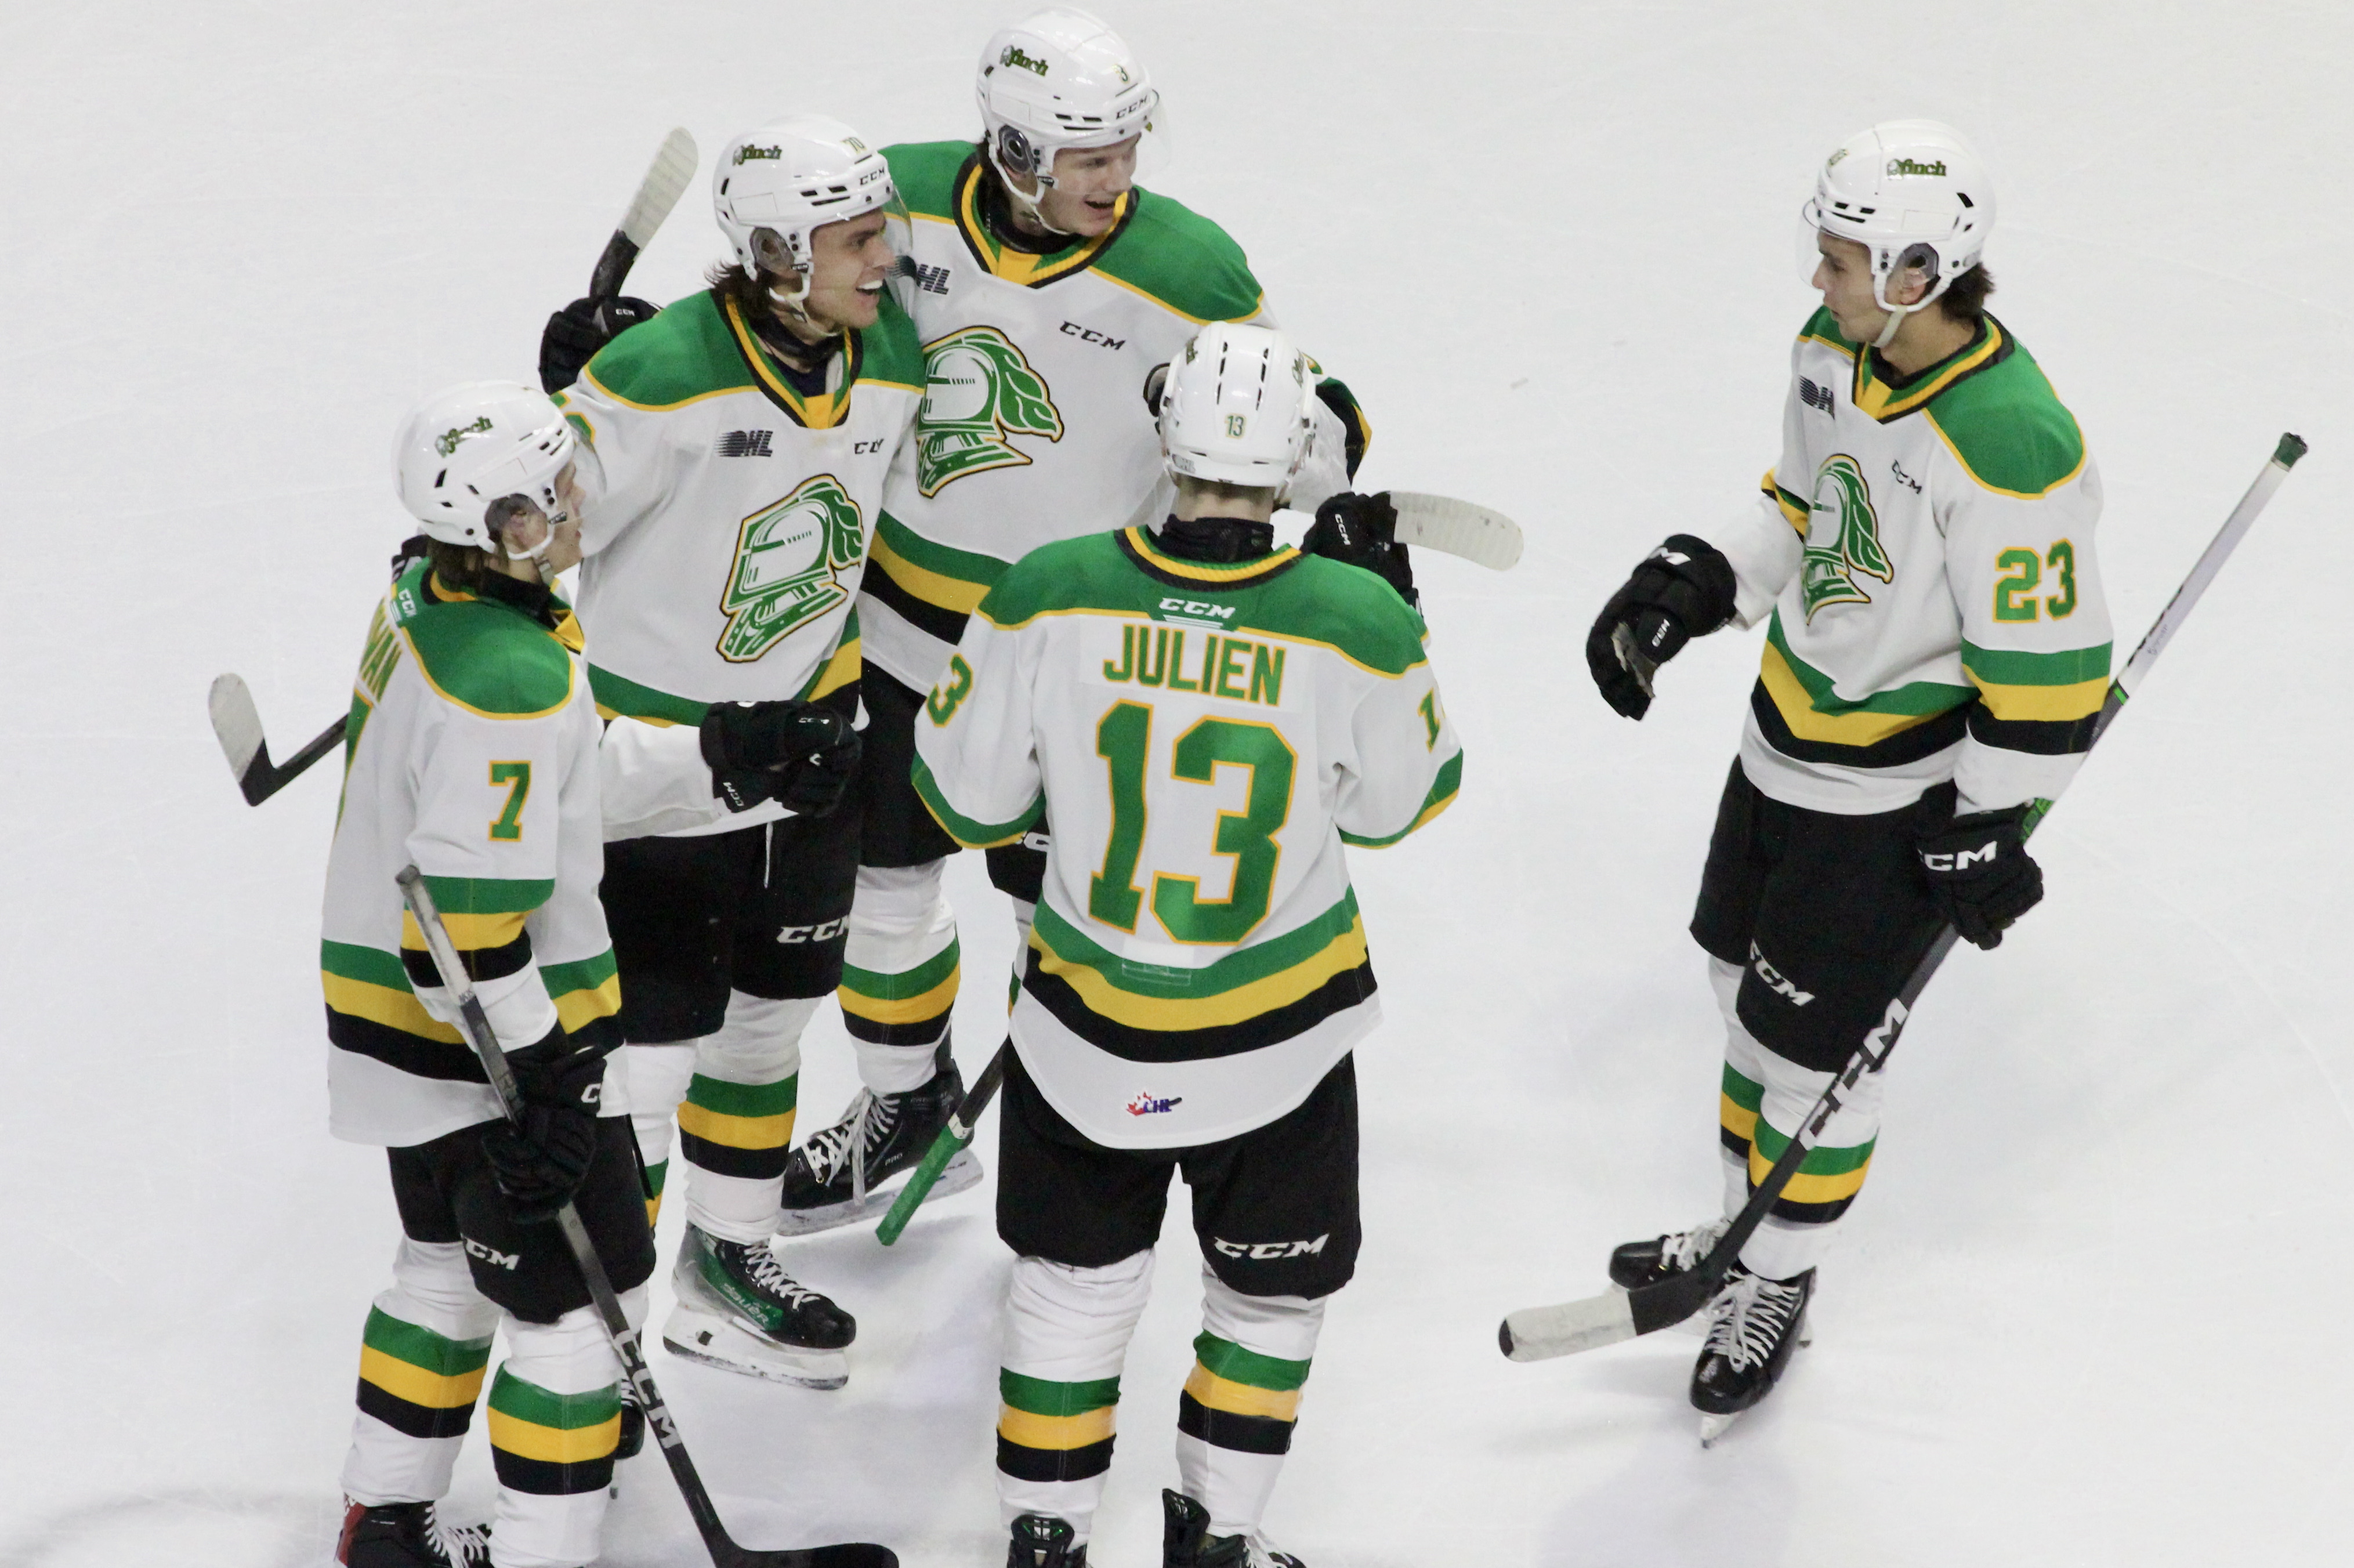 London Knights hit 100 points with 7-4 victory in Windsor on St